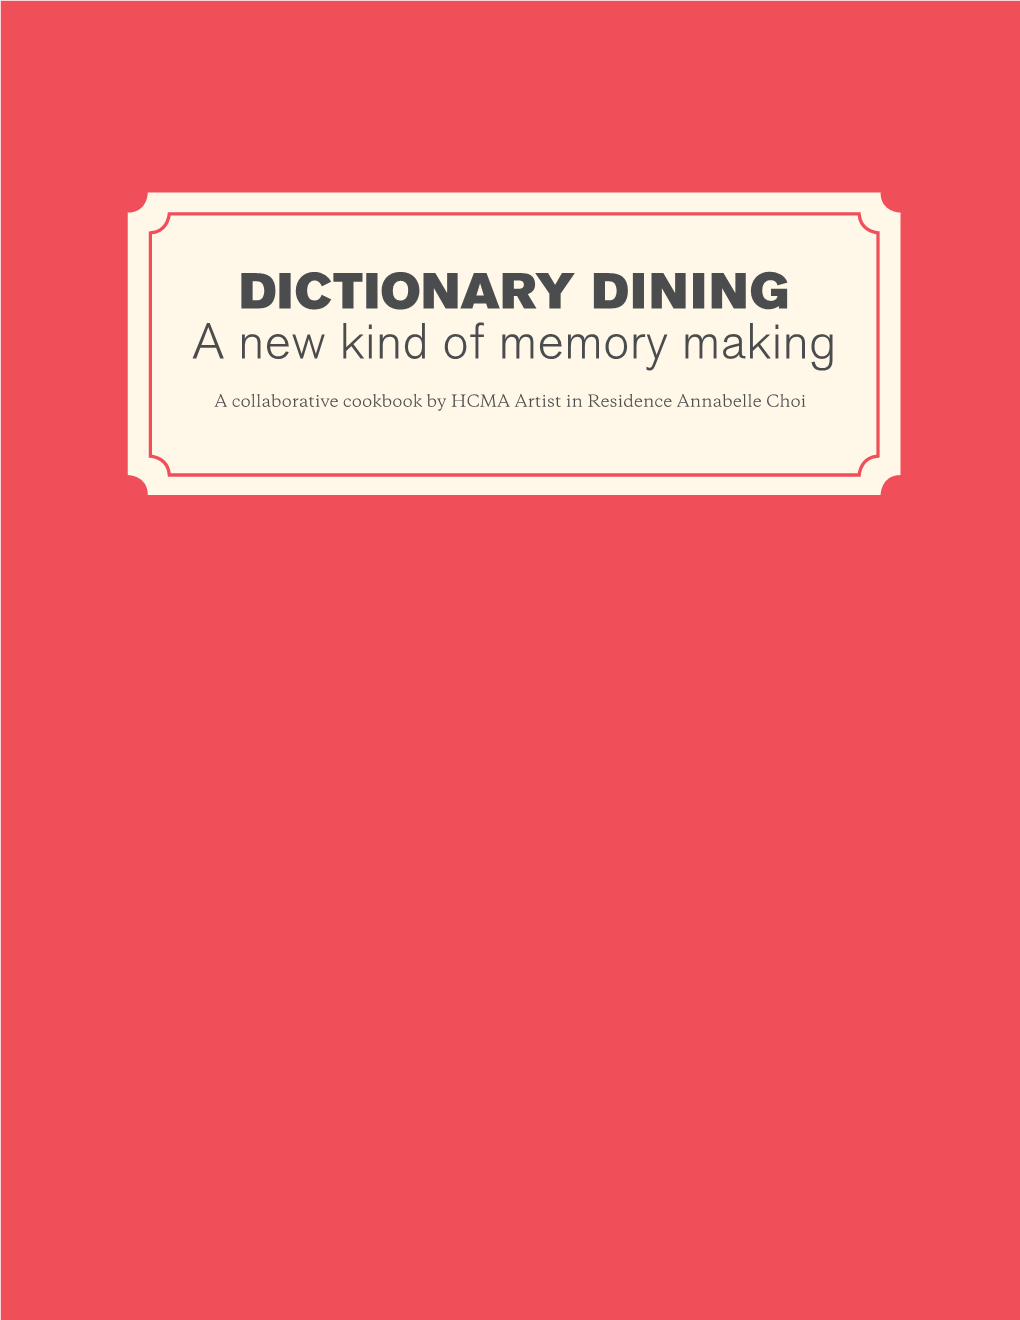 DICTIONARY DINING a New Kind of Memory Making